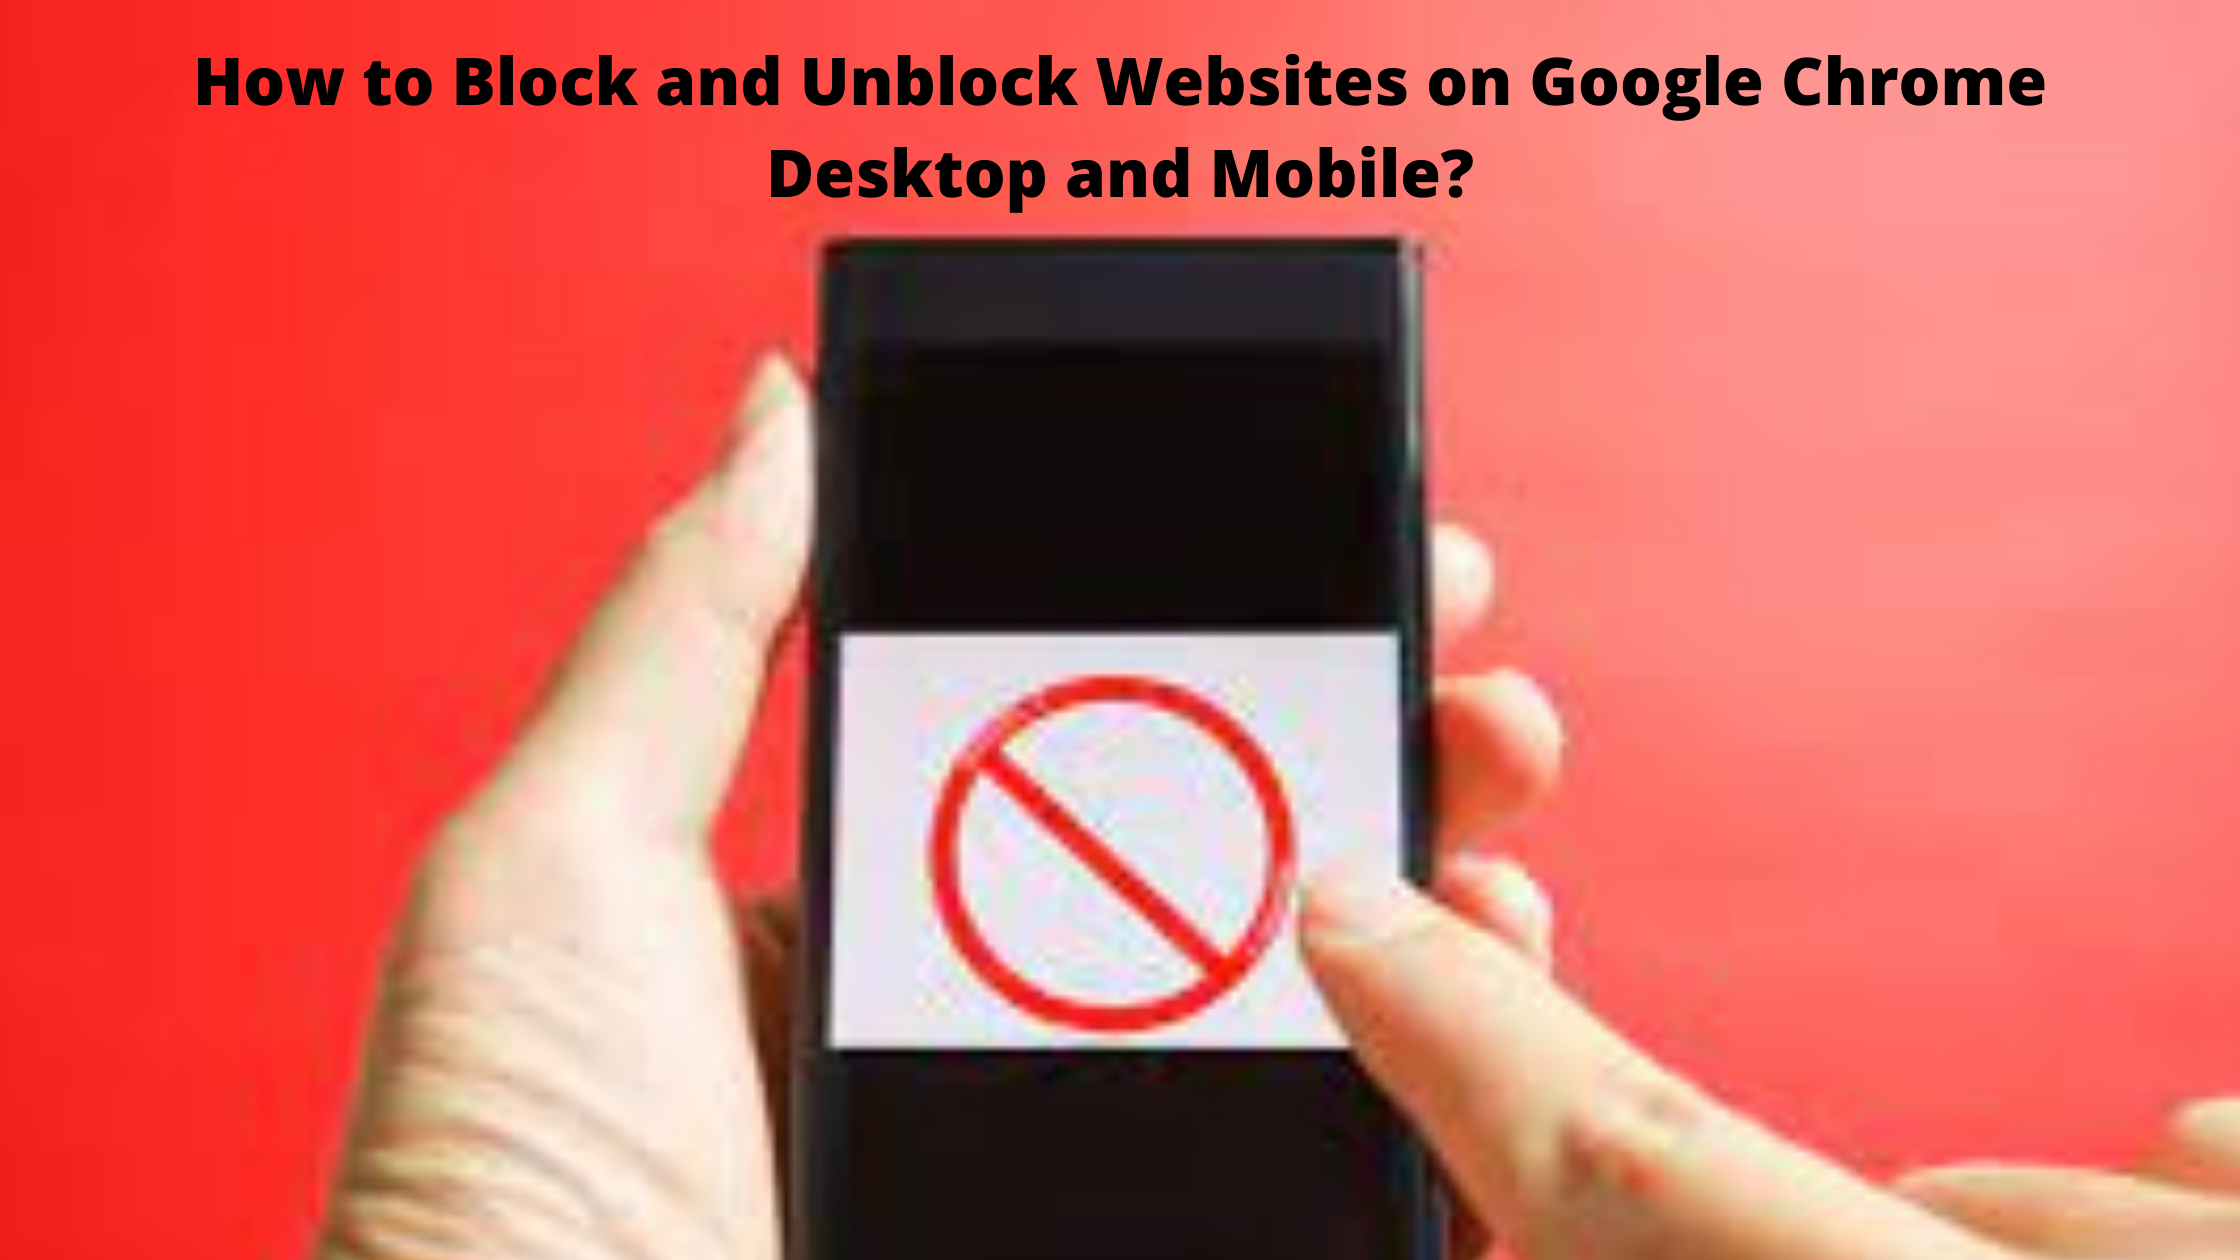 How to Block and Unblock Websites on Google Chrome Desktop and Mobile?